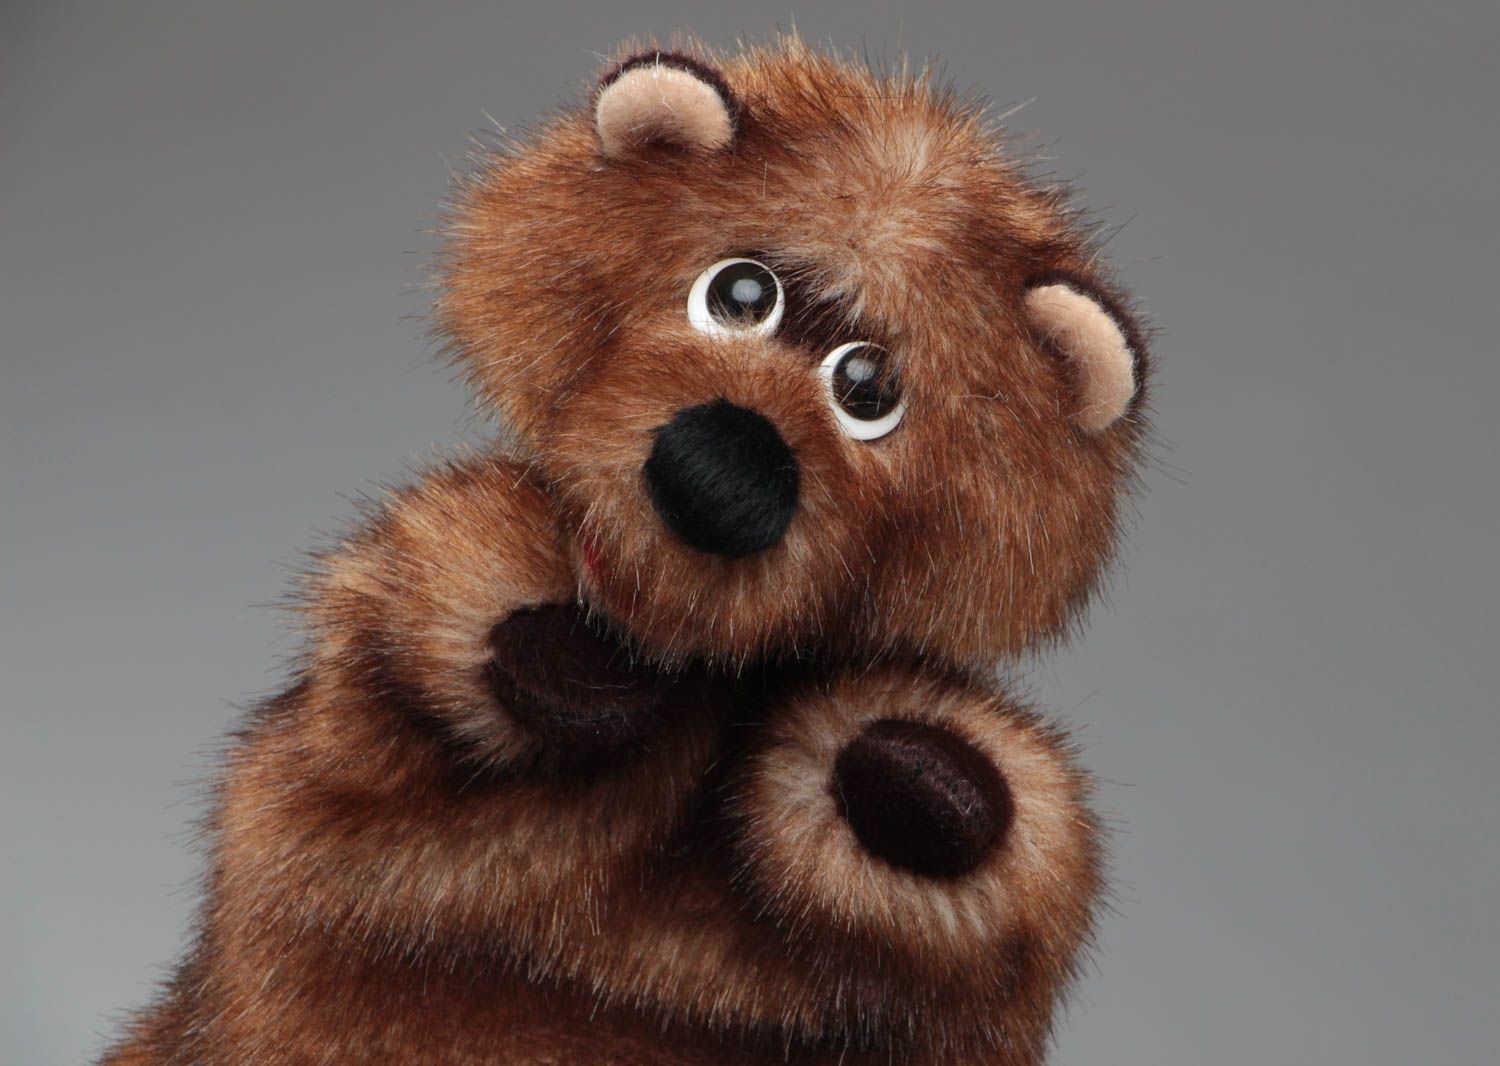 Handmade soft glove toy sewn of brown faux fur bear cub for puppet theater photo 4